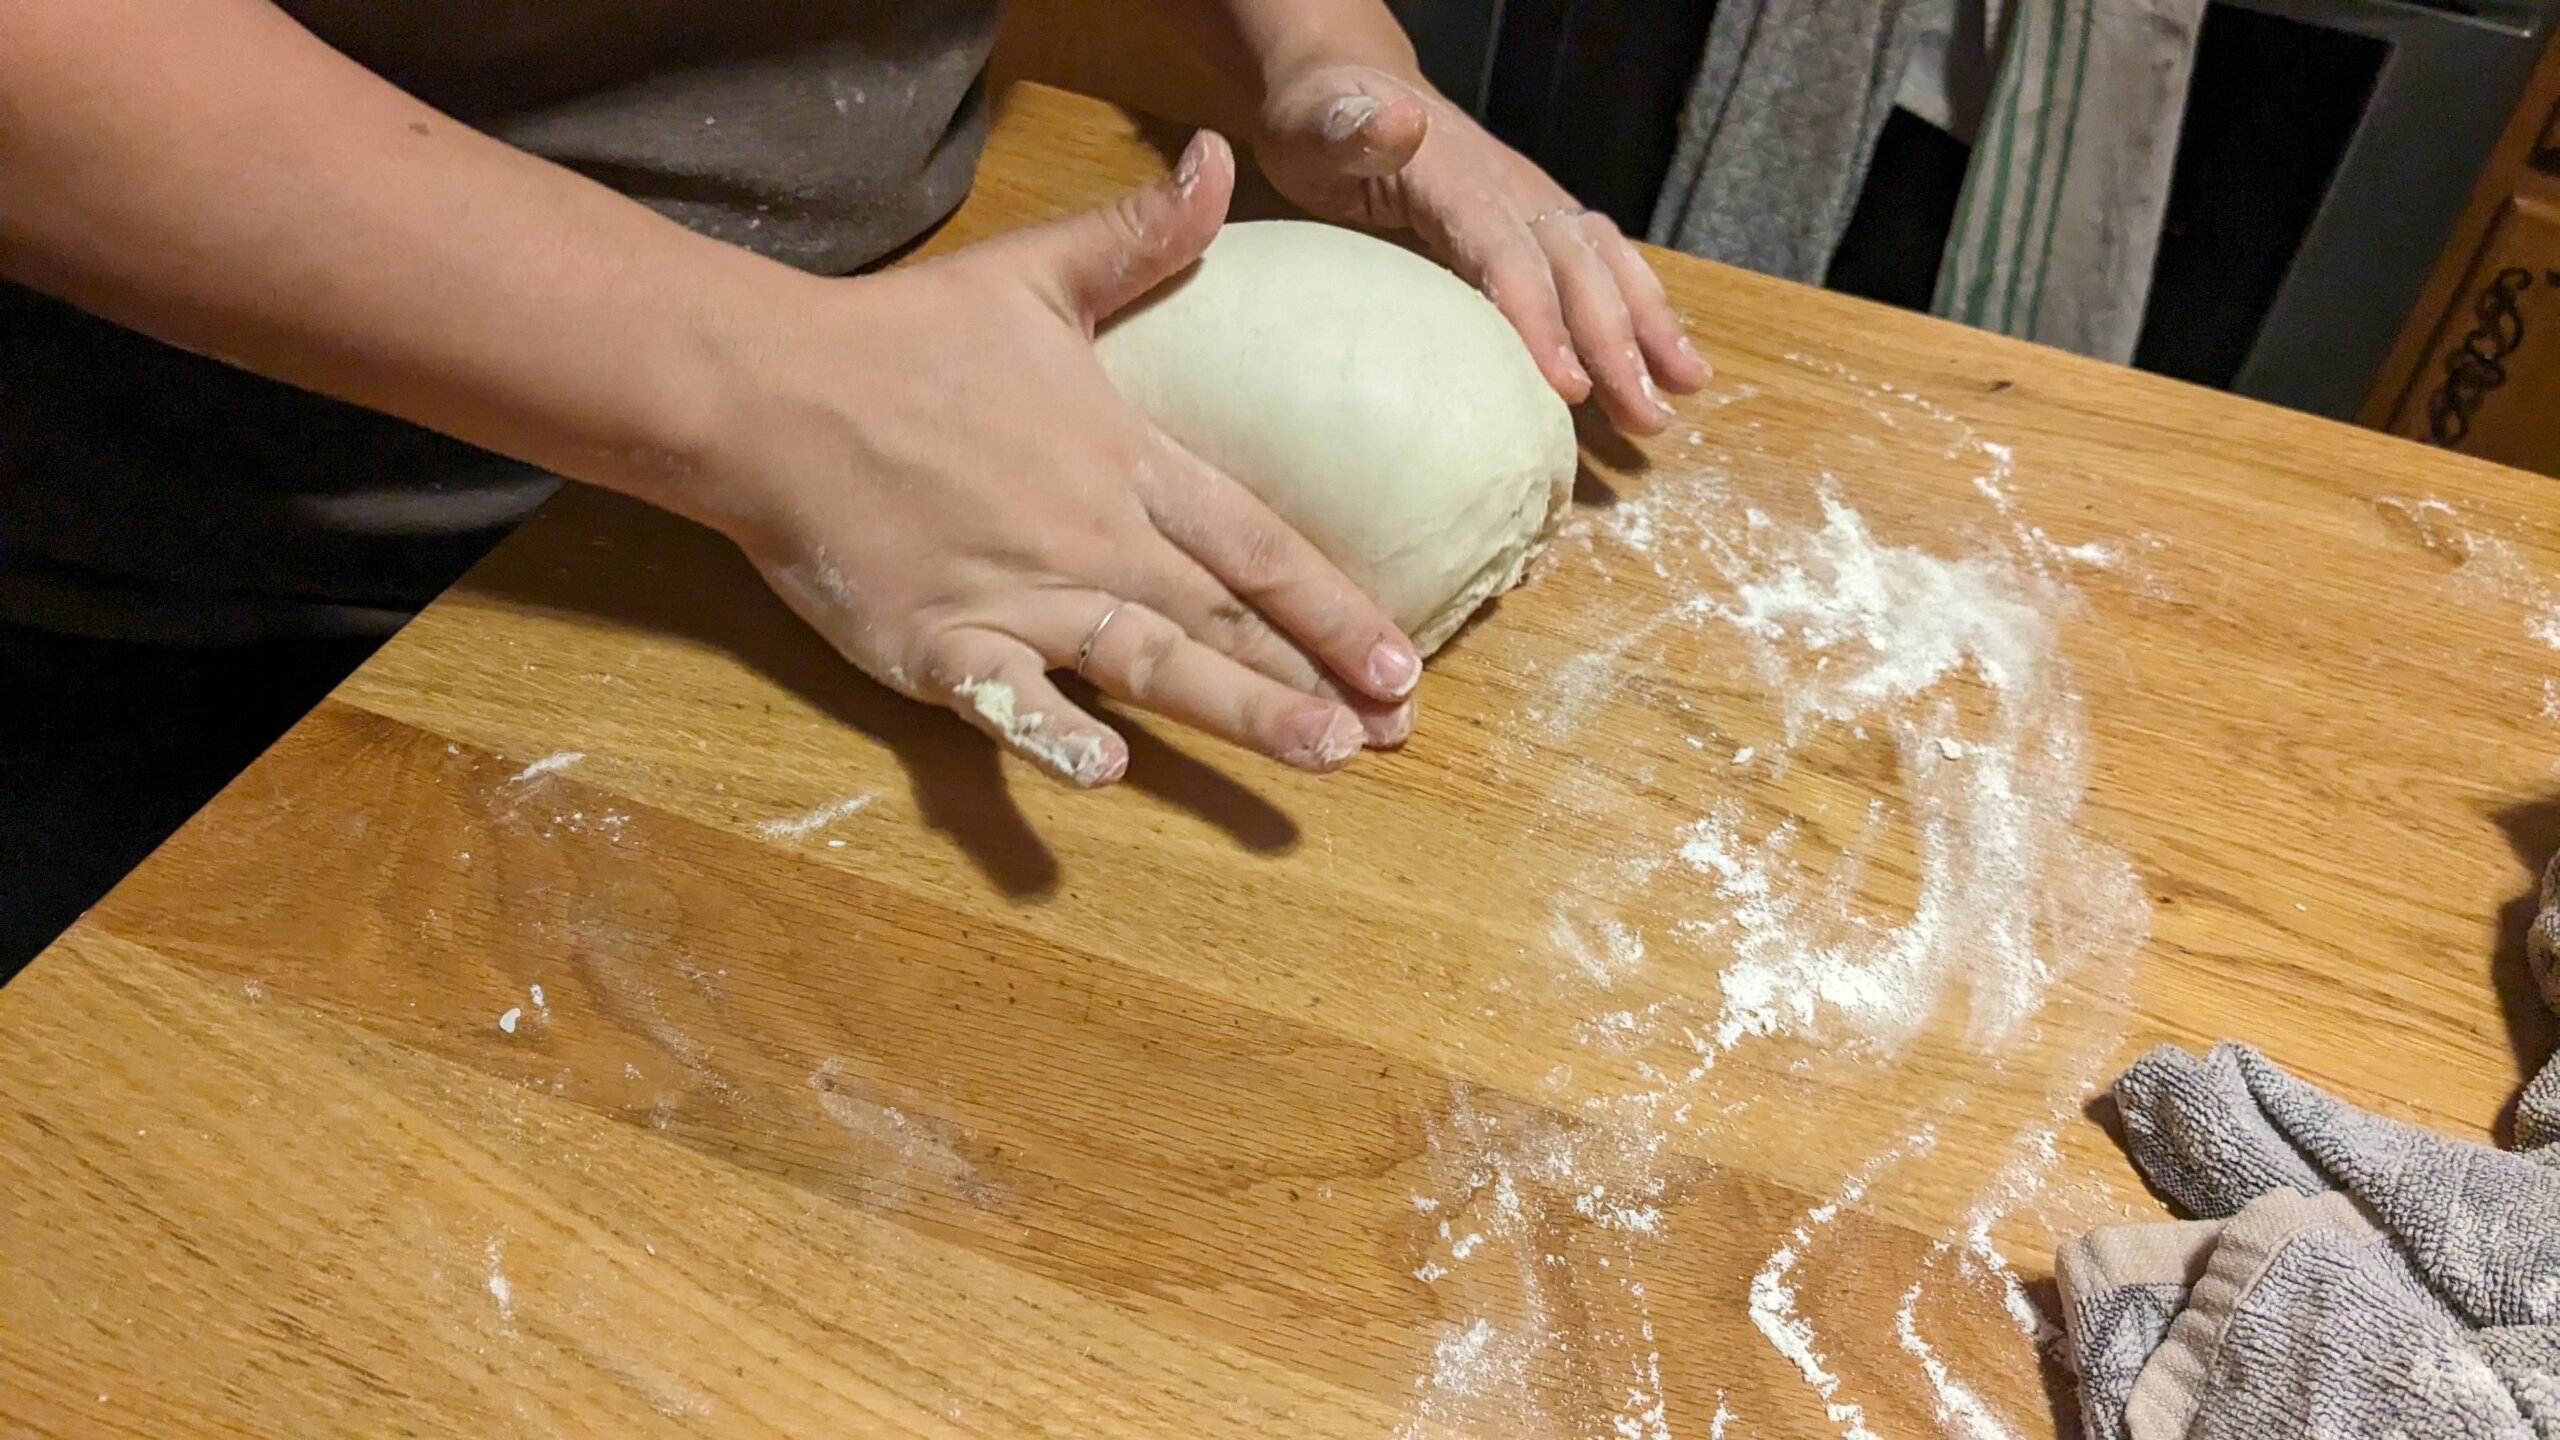 woman tucking and gently forming a sourdough loaf